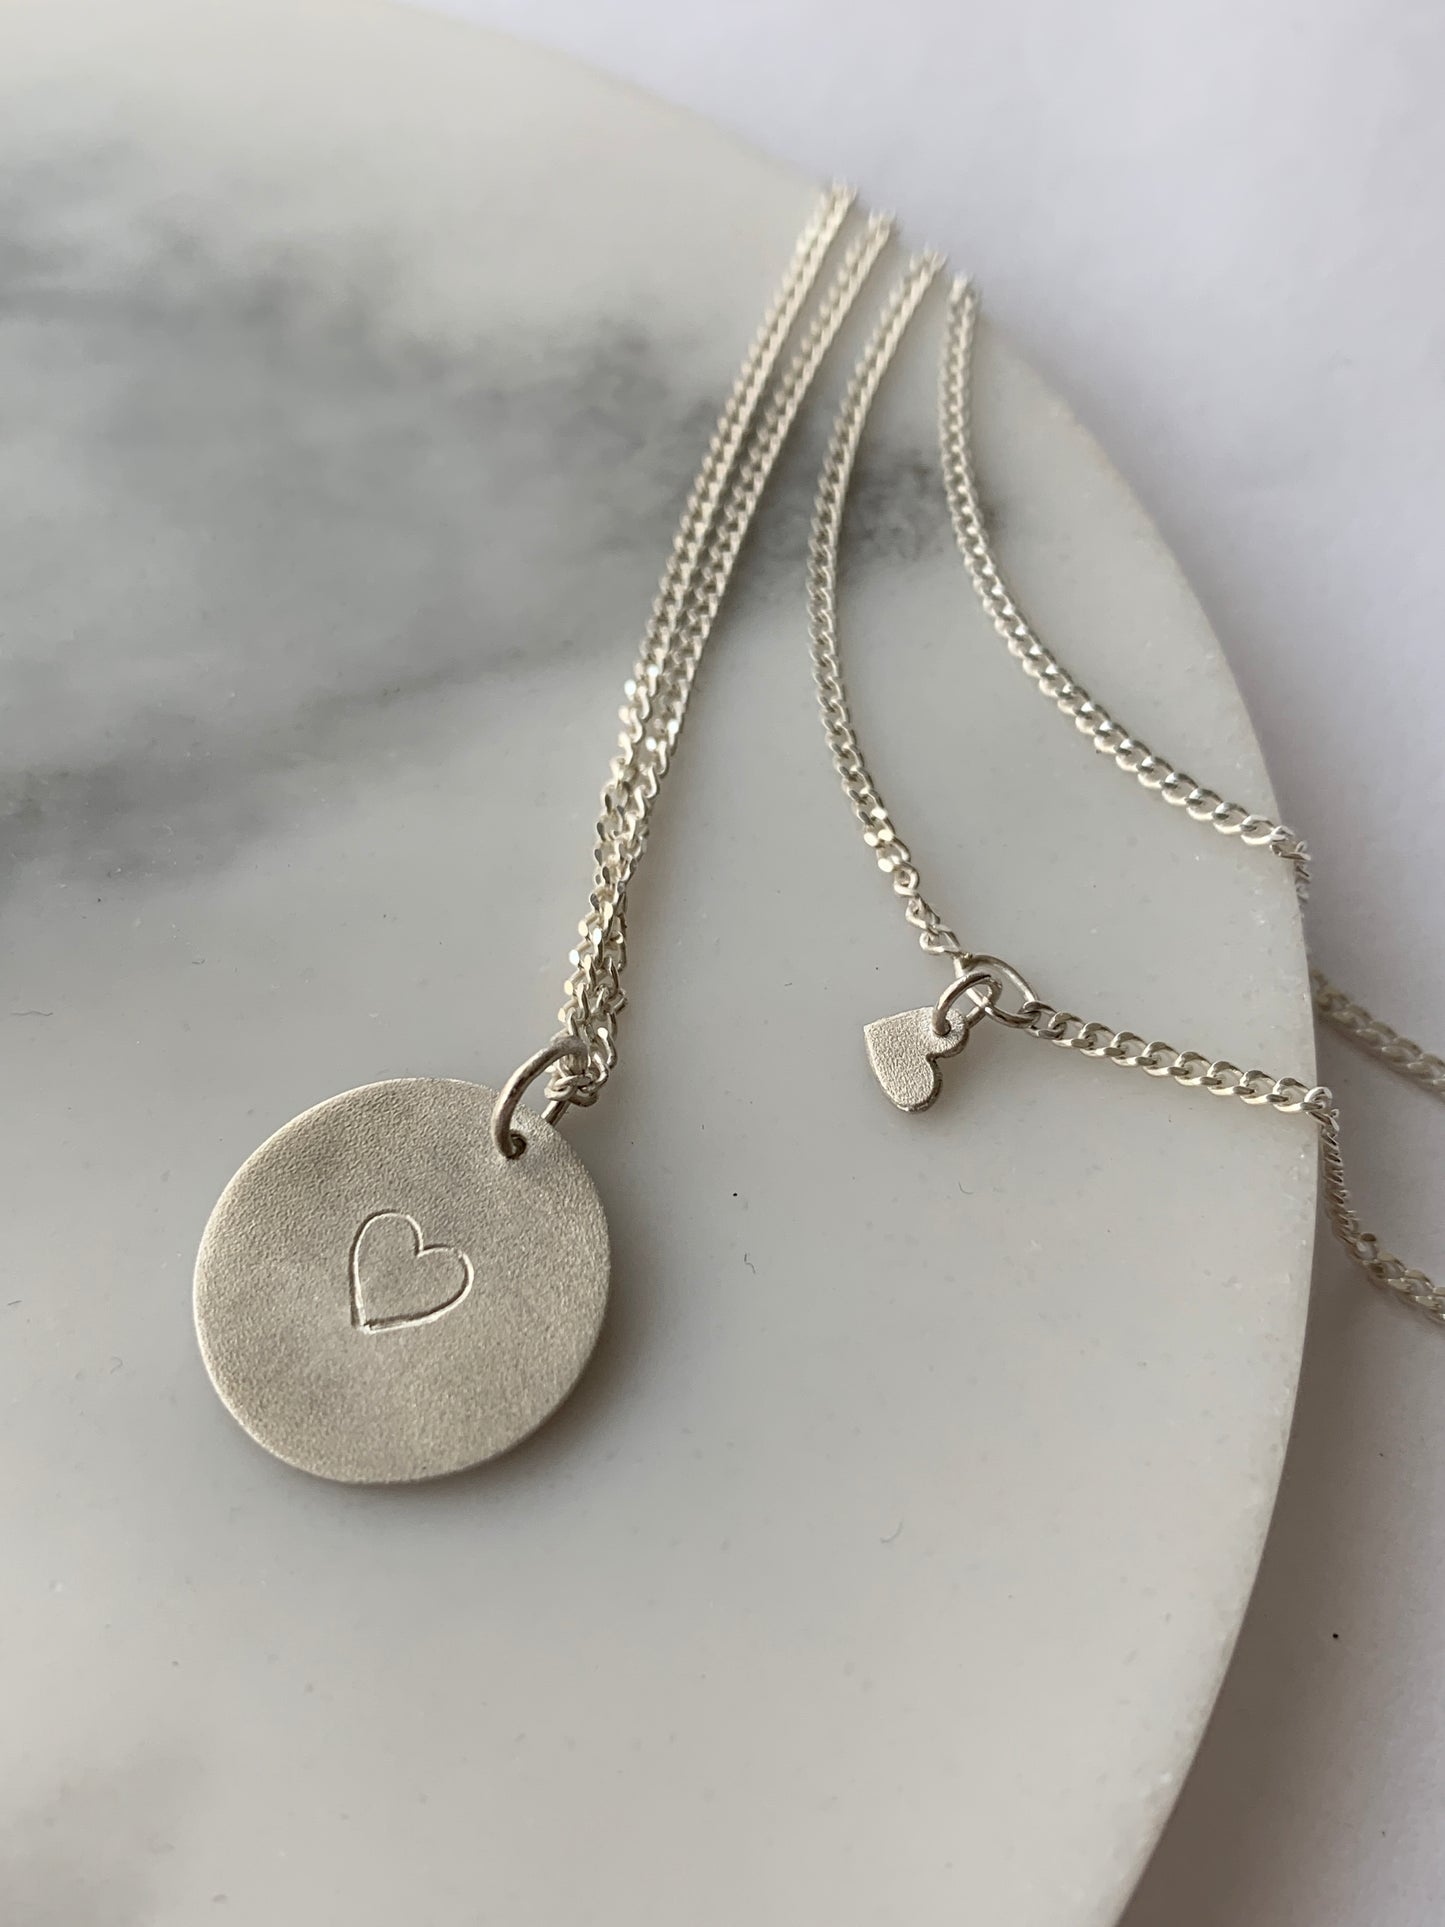 Personalised jewellery for an extra touch of thoughtfulness